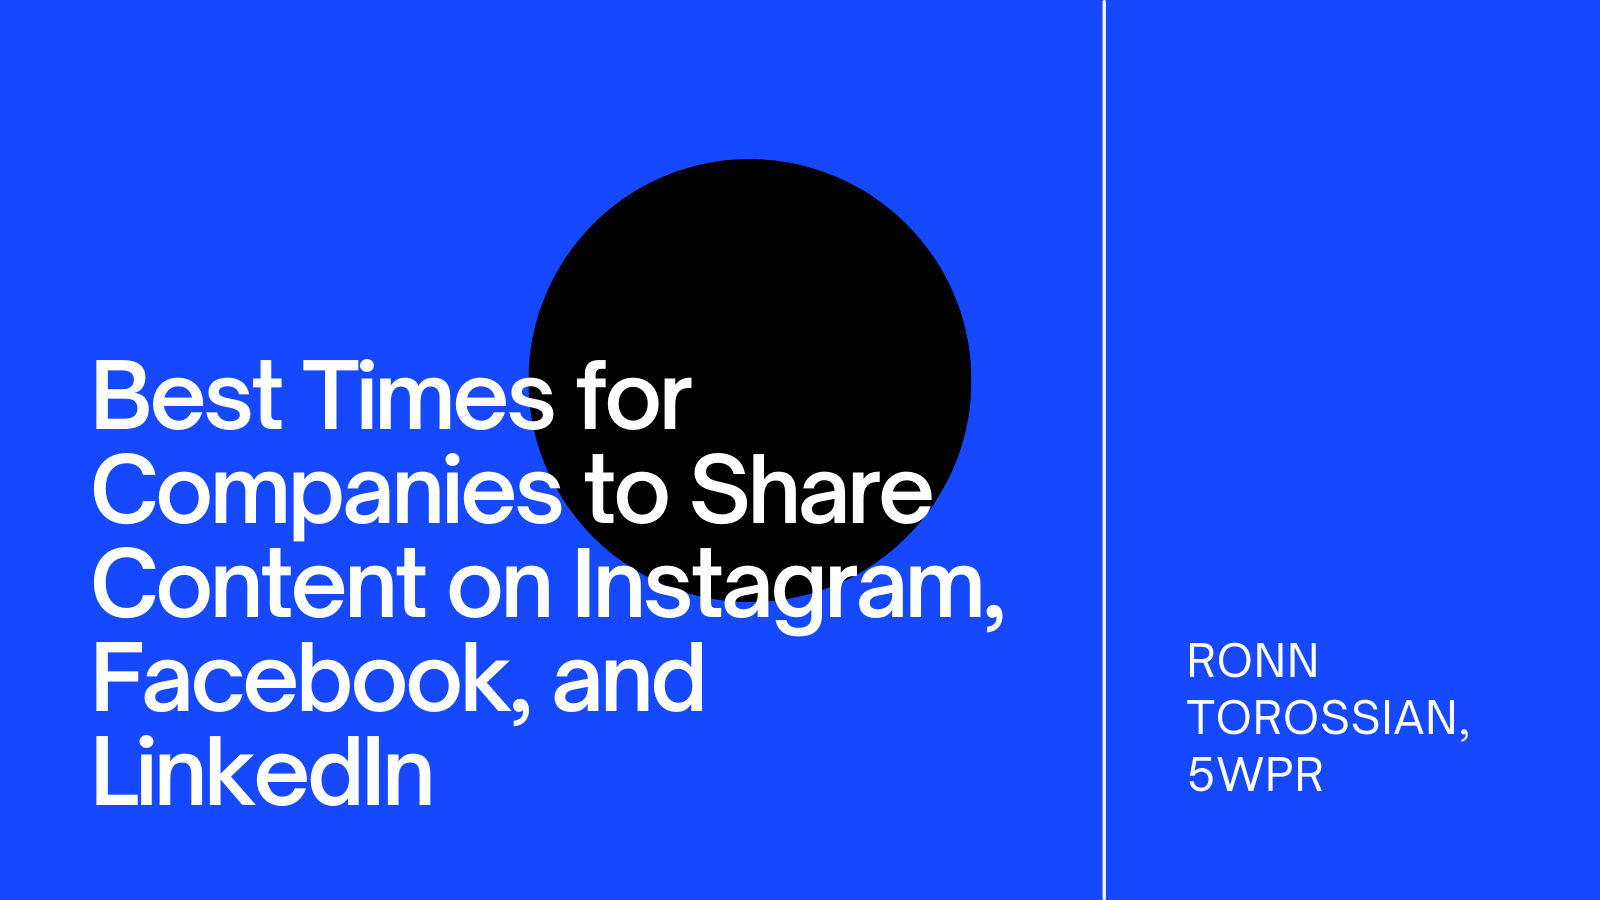 Best Times for Companies to Share Content on Instagram, Facebook, and LinkedIn